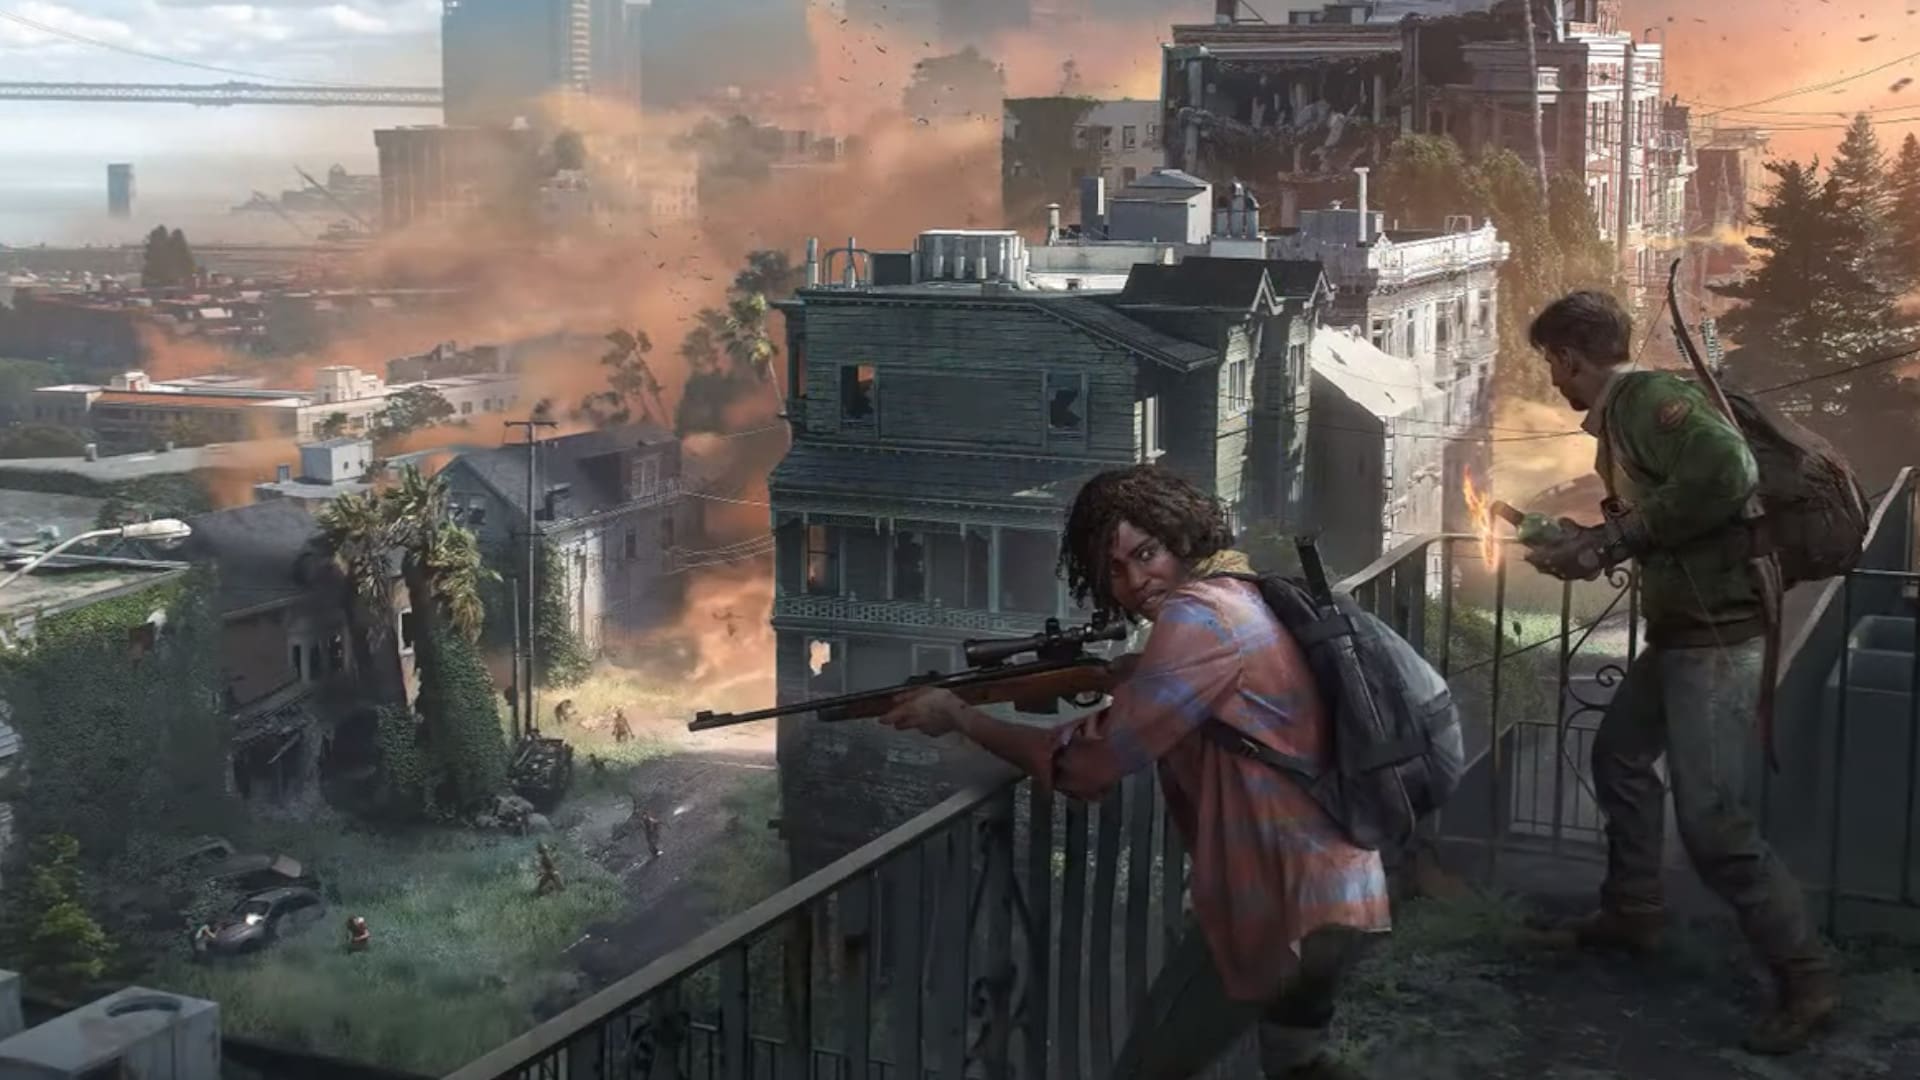 Tlou Multiplayer The Last Of Us Factions Isn’t Ready To Be Showcased